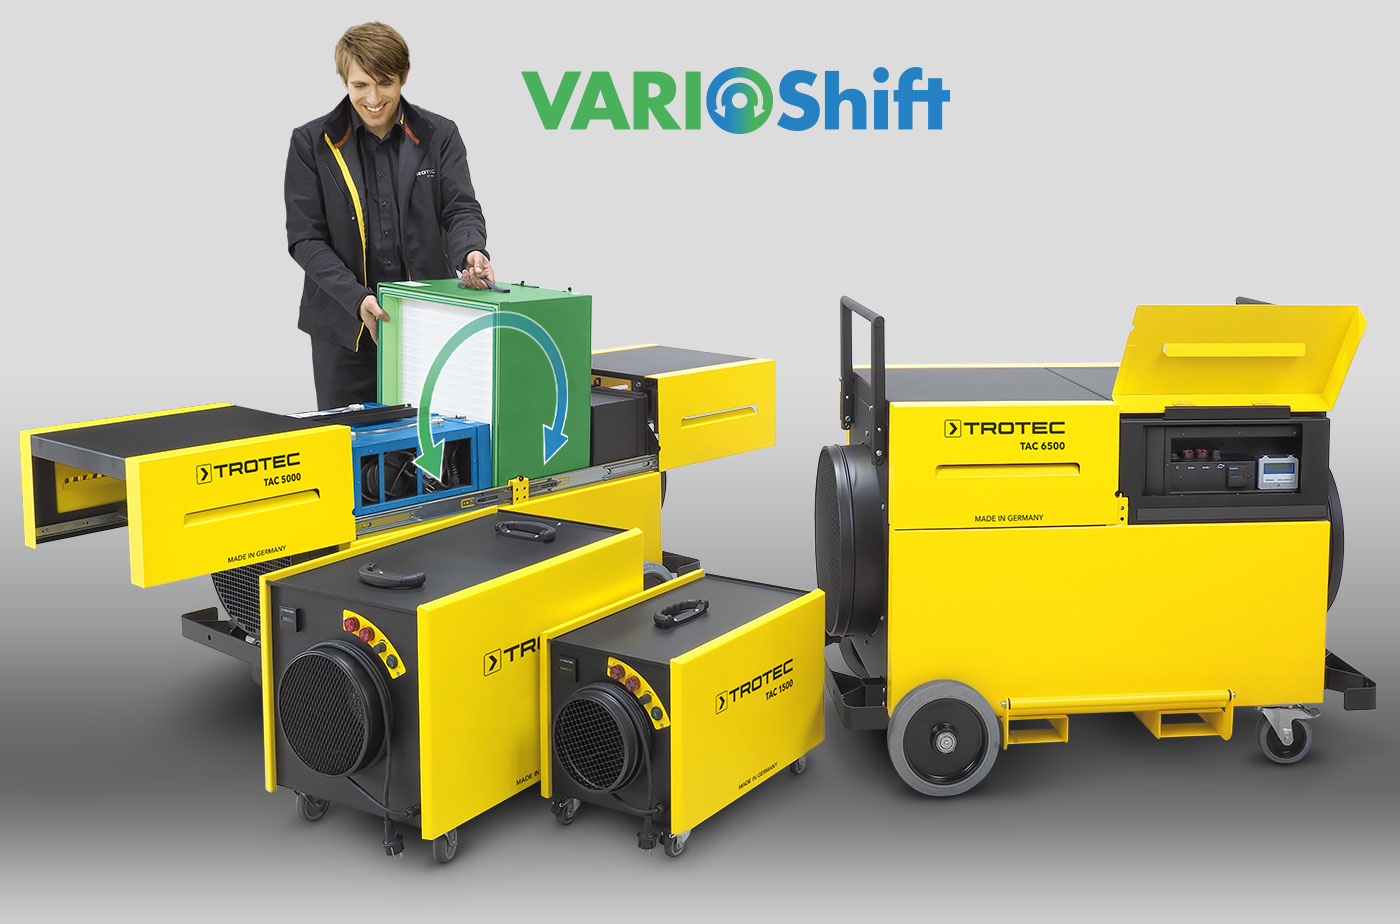 All TAC models with Vario-shift function